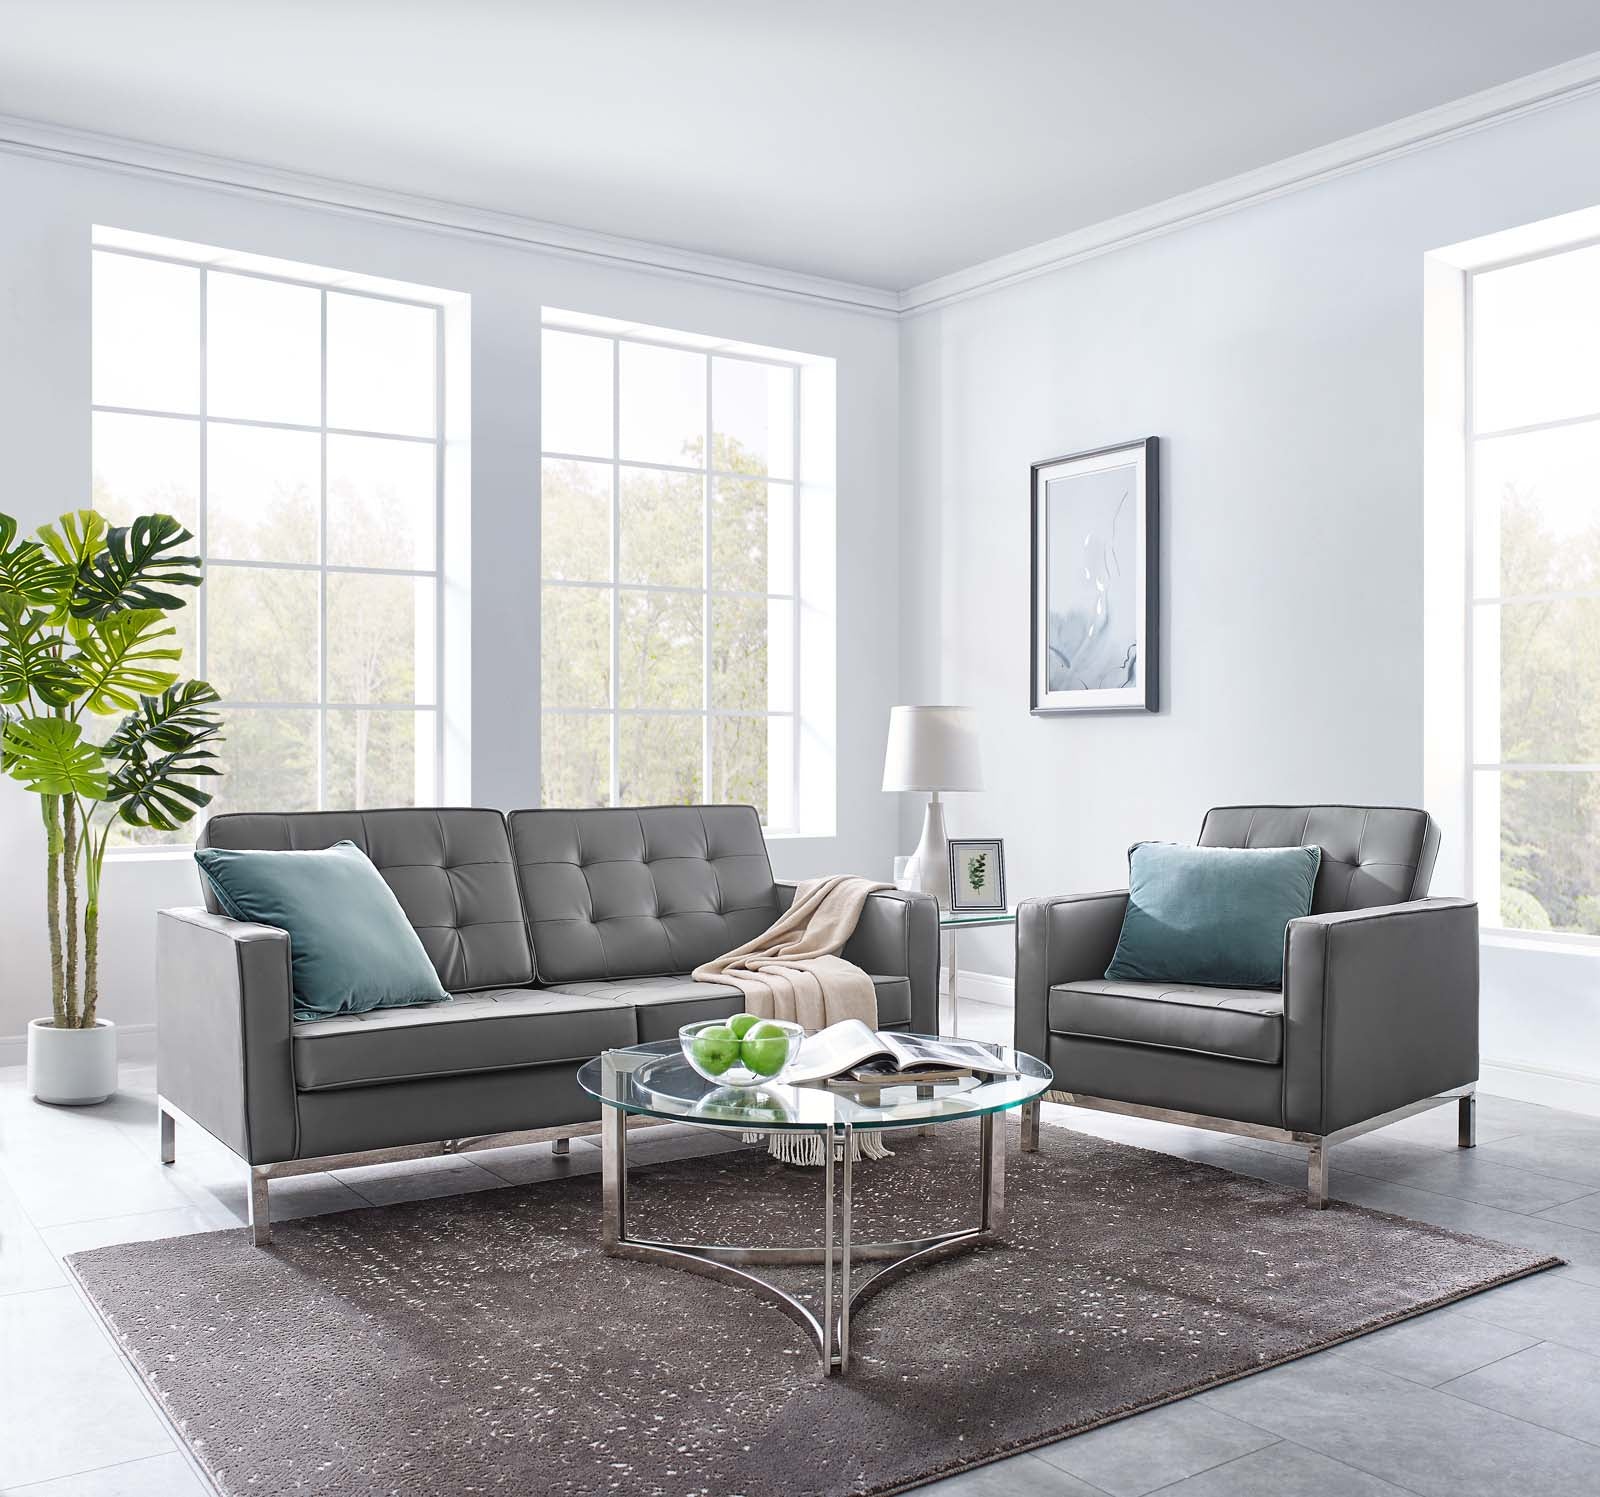 Modway Living Room Sets - Loft Tufted Upholstered Faux Leather Loveseat and Armchair Set Silver Gray